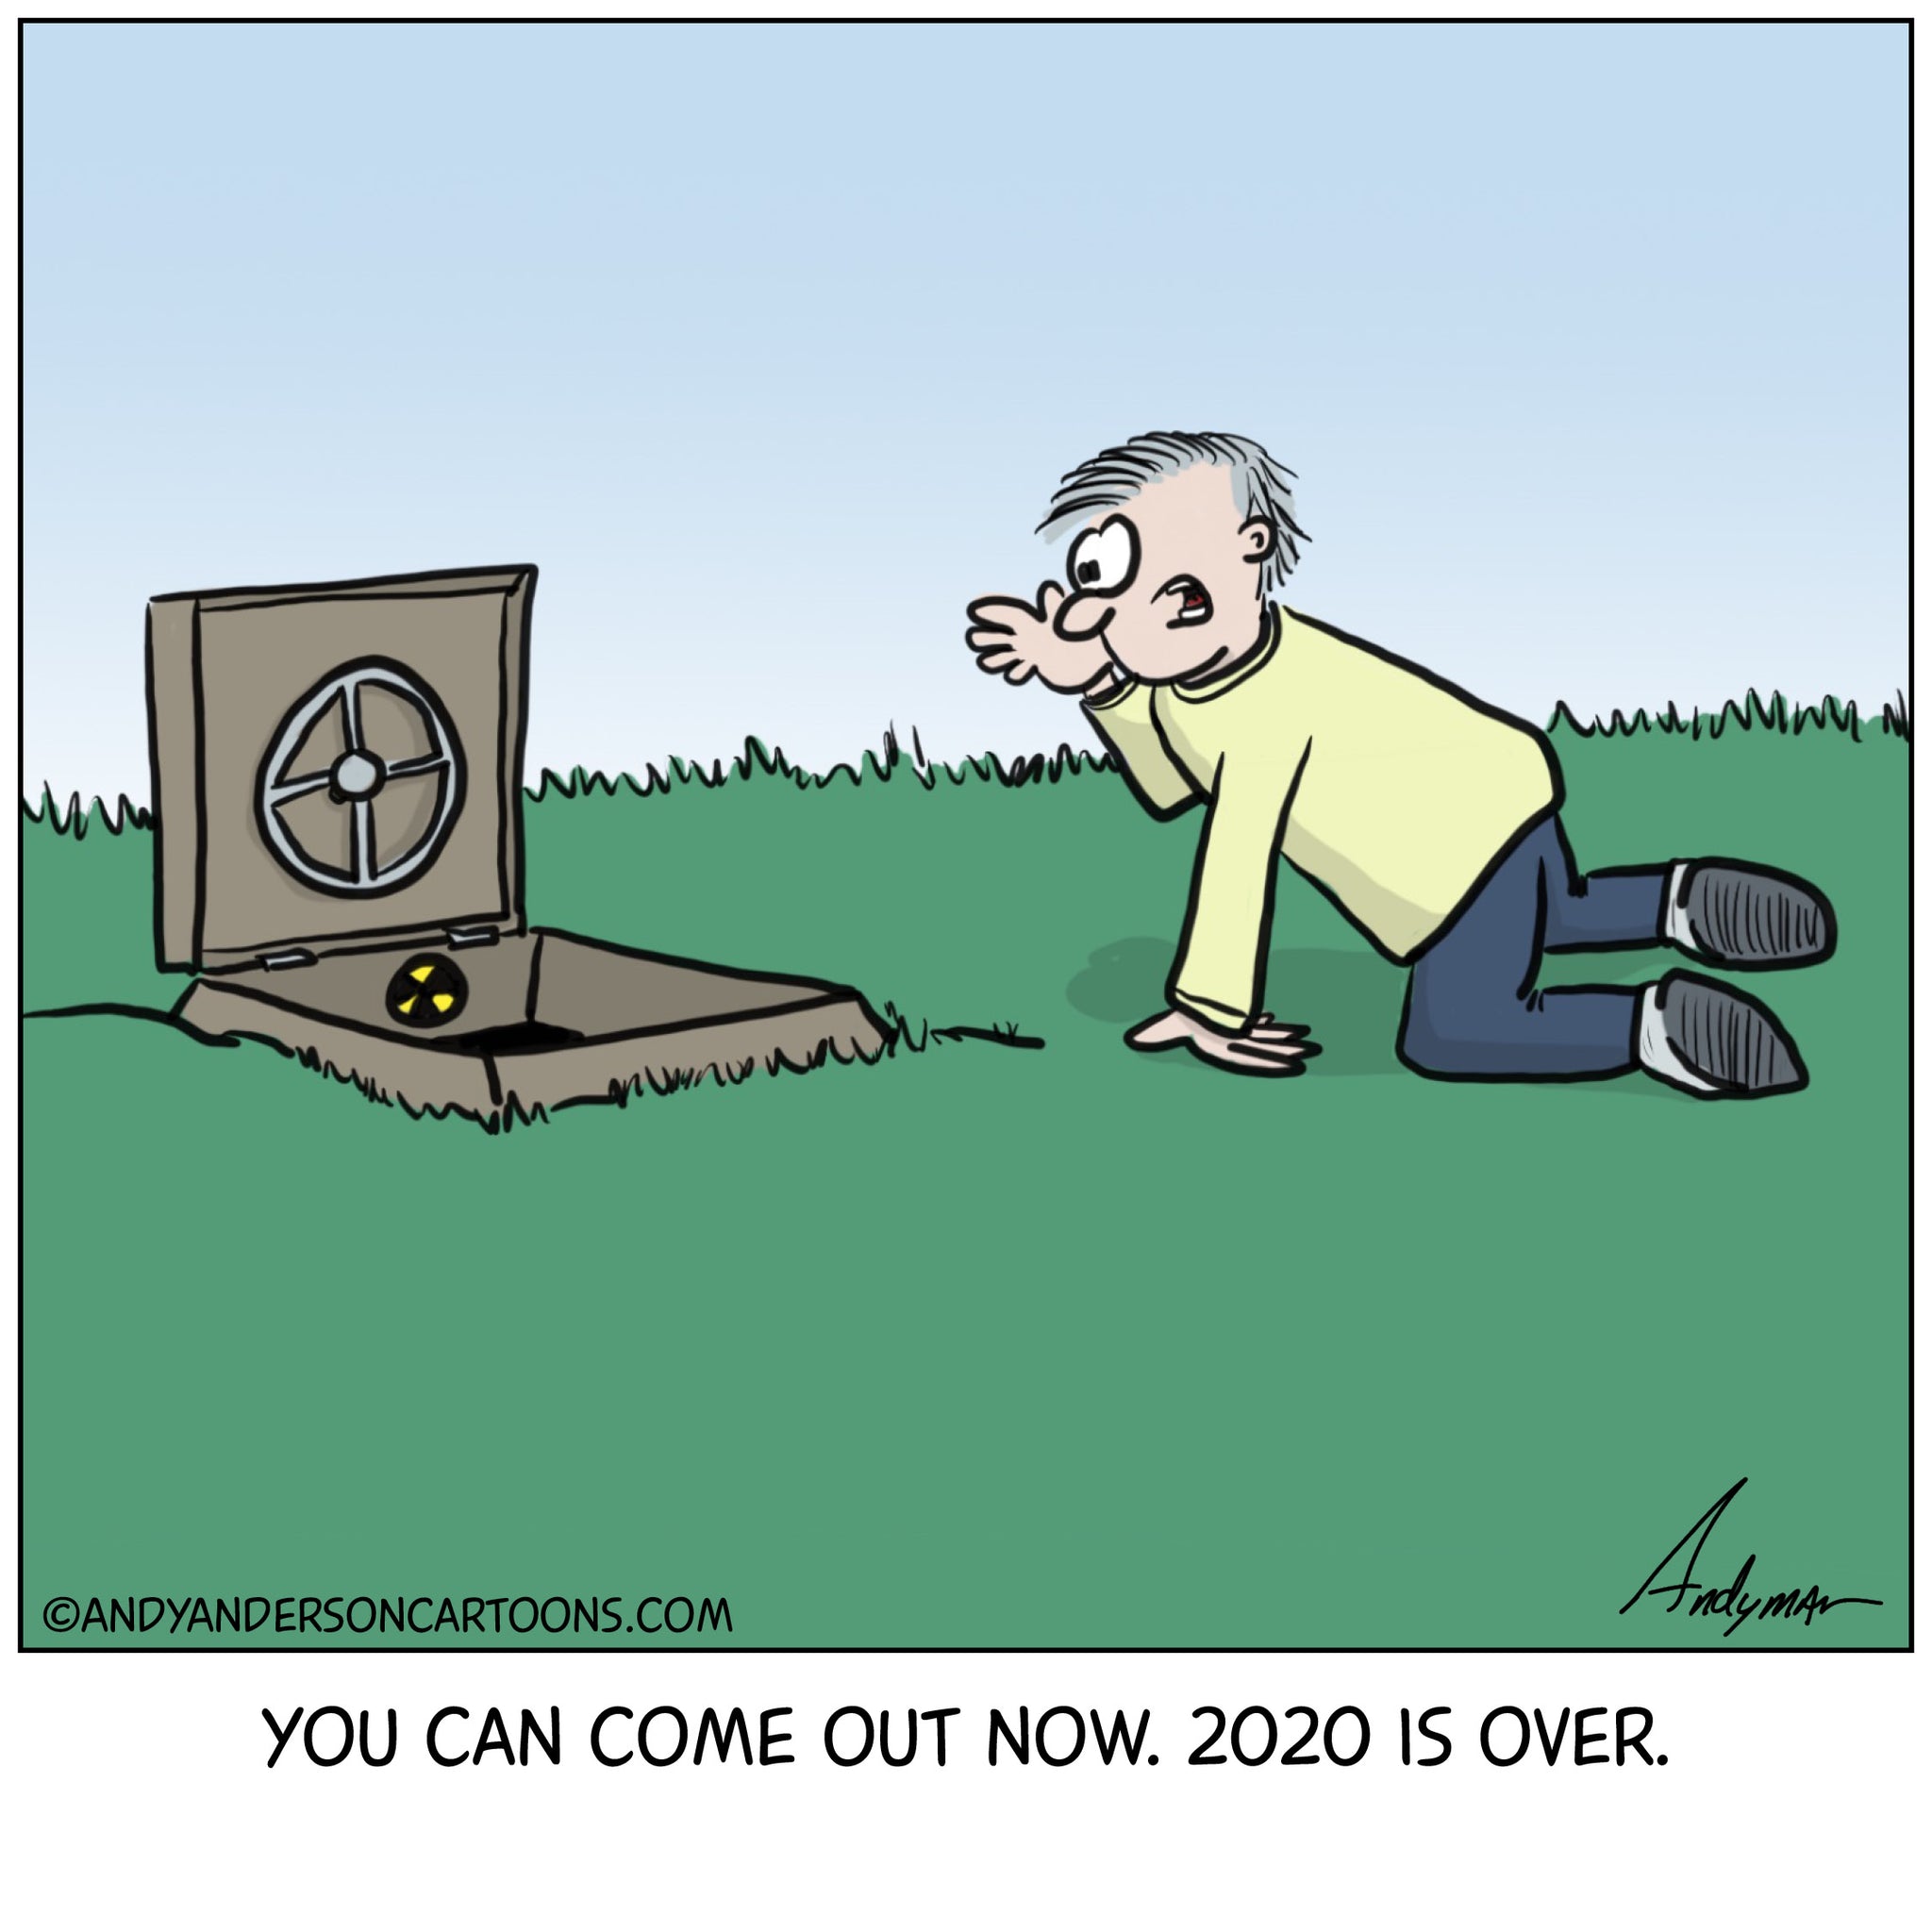 Cartoon about 2020 coming to an end and safe to come out of your bunker